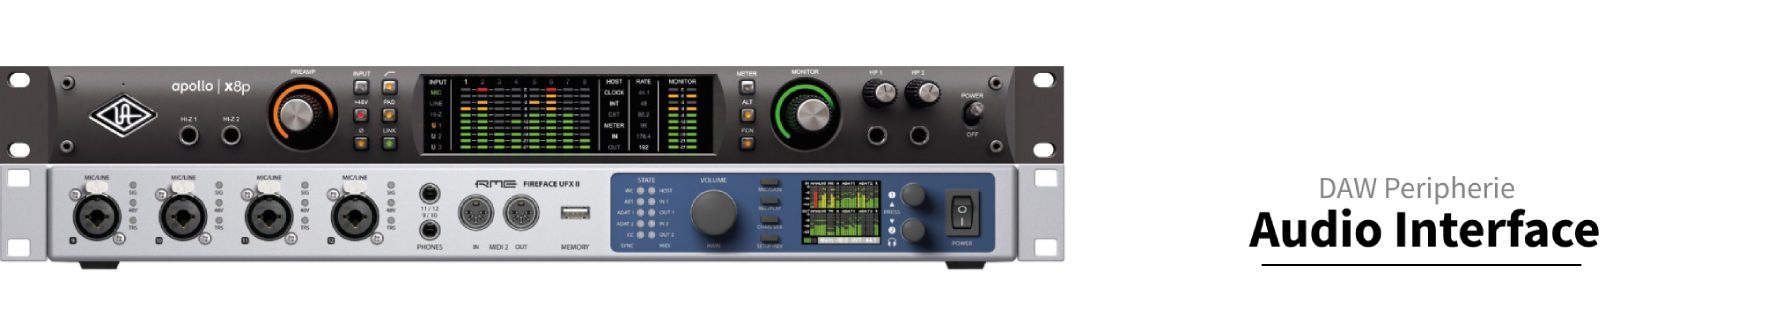 Audio Interface-8 Inputs-SPDIF coax Out-8 Preamps-2 DI-extern 19 Zoll